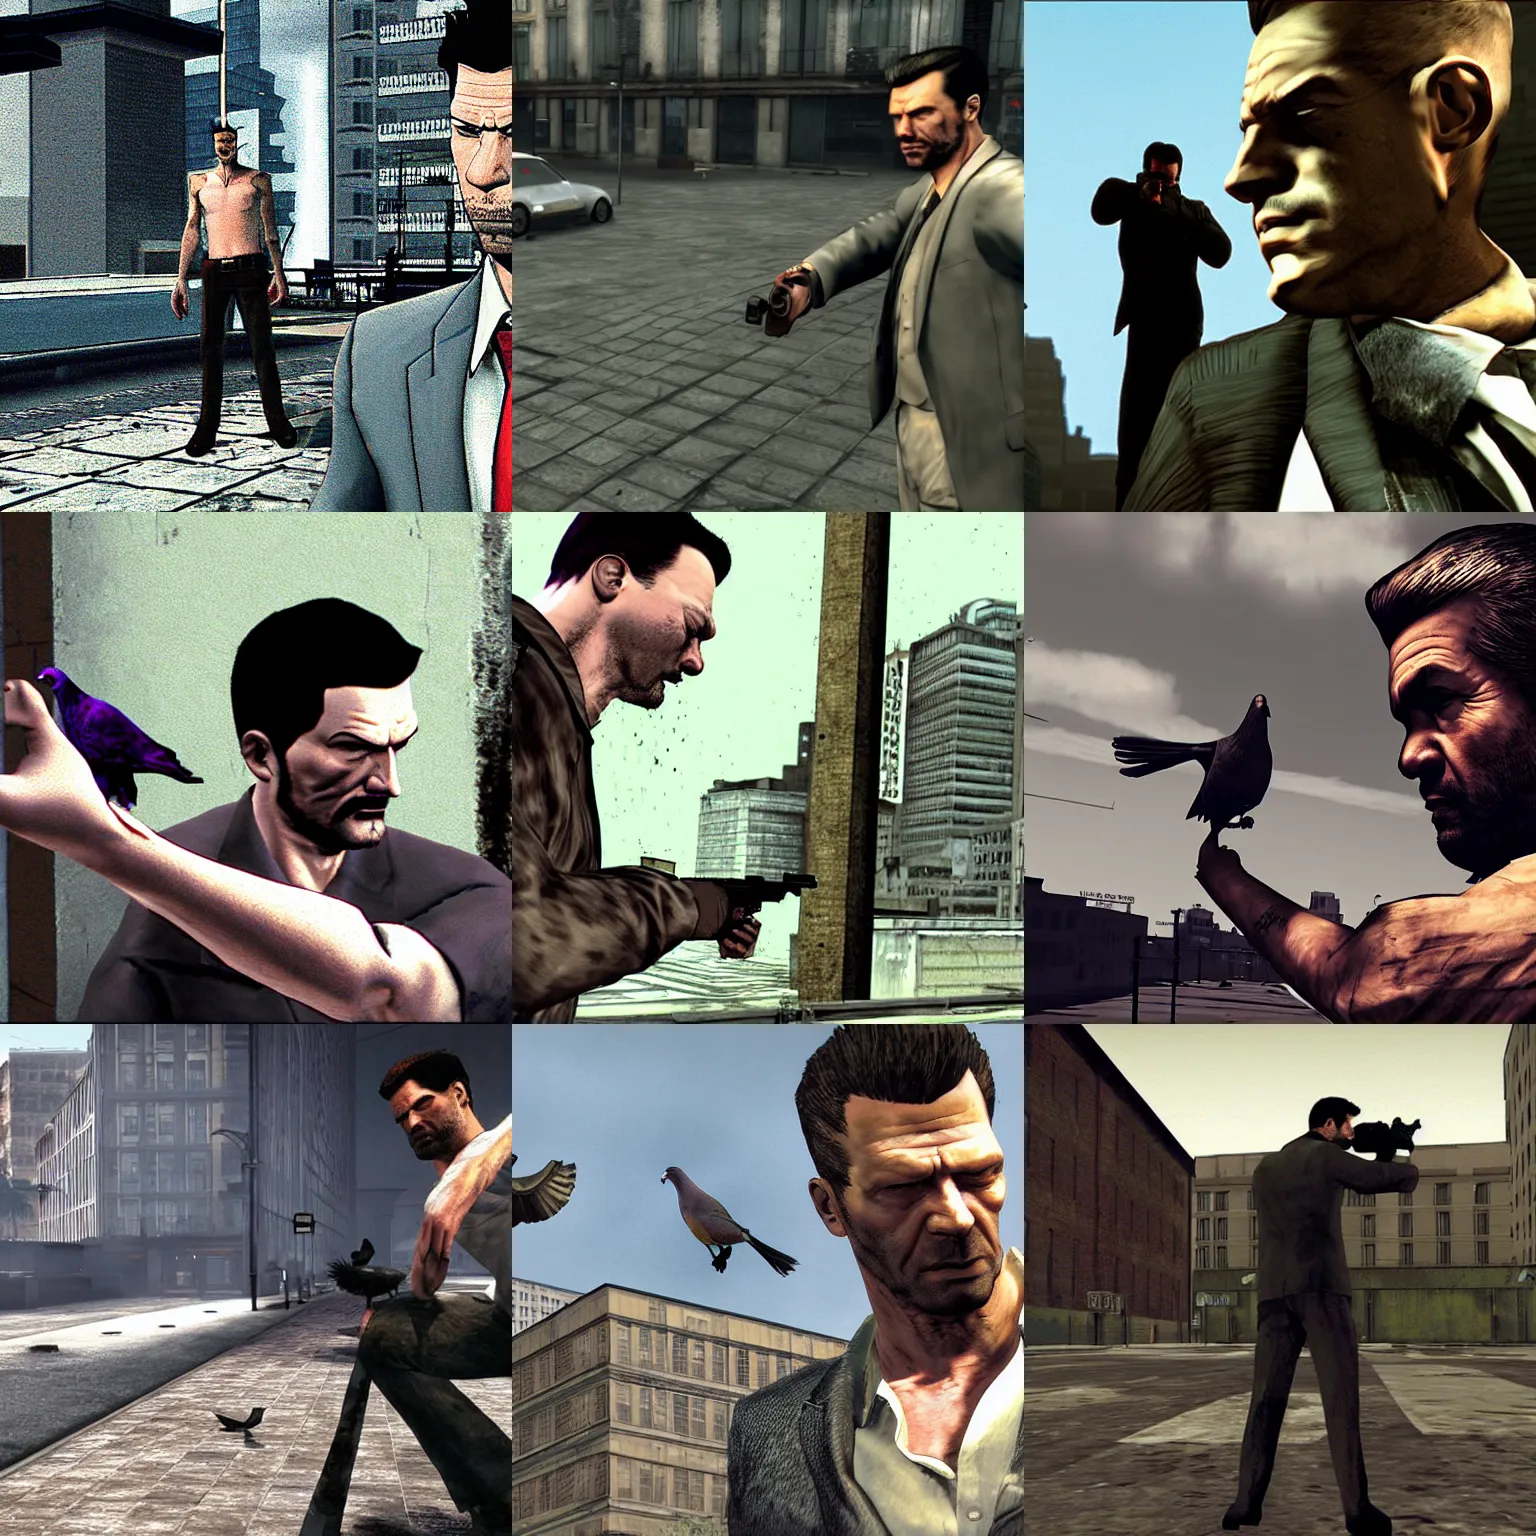 Ranking The Max Payne Games From Worst To Best - Cultured Vultures